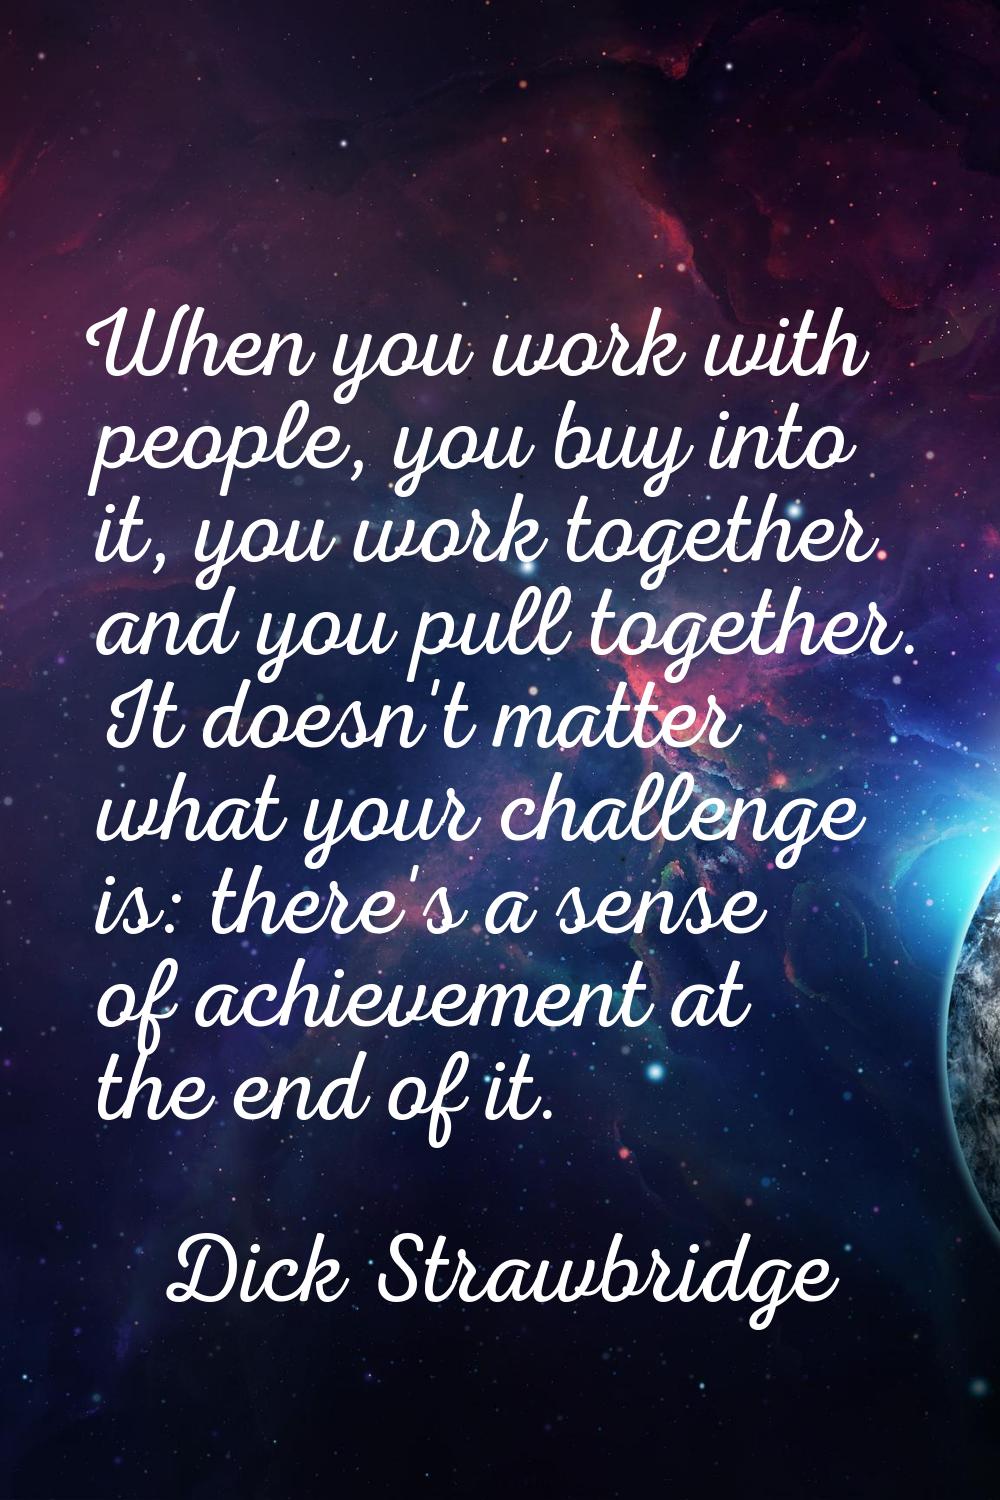 When you work with people, you buy into it, you work together and you pull together. It doesn't mat